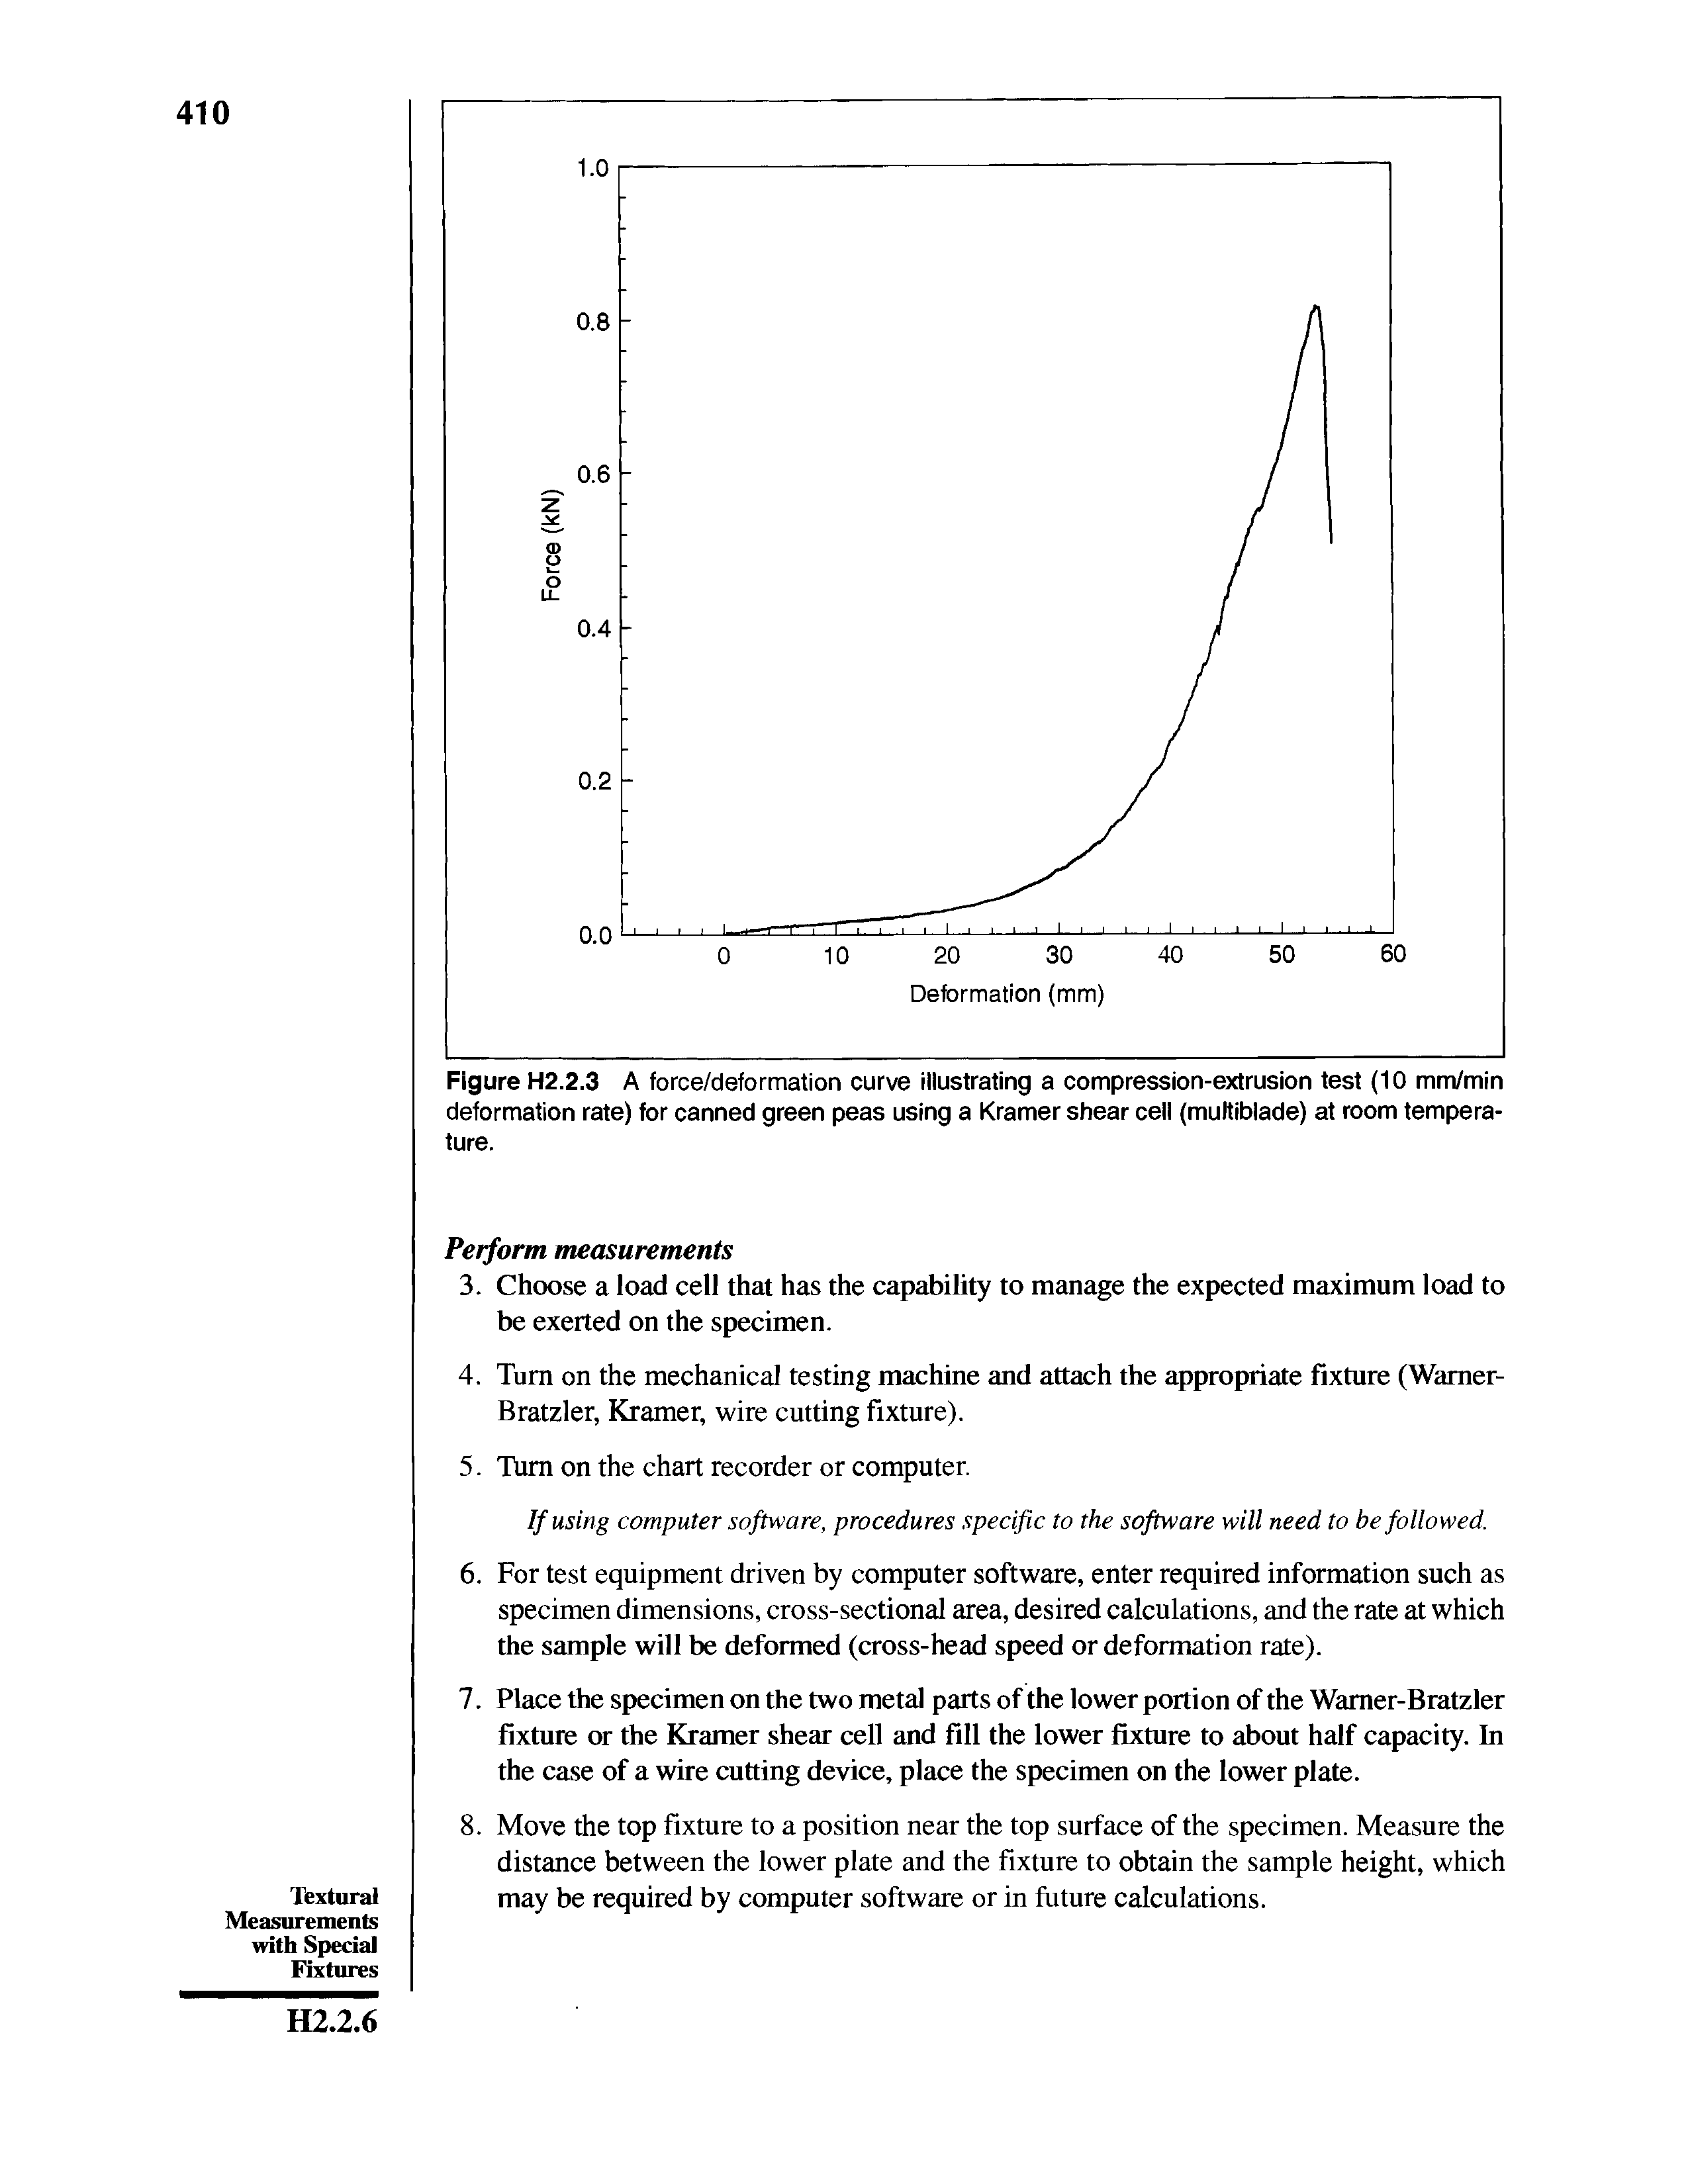 Figure H2.2.3 A force/deformation curve illustrating a compression-extrusion test (10 mm/min deformation rate) for canned green peas using a Kramer shear cell (multiblade) at room temperature.